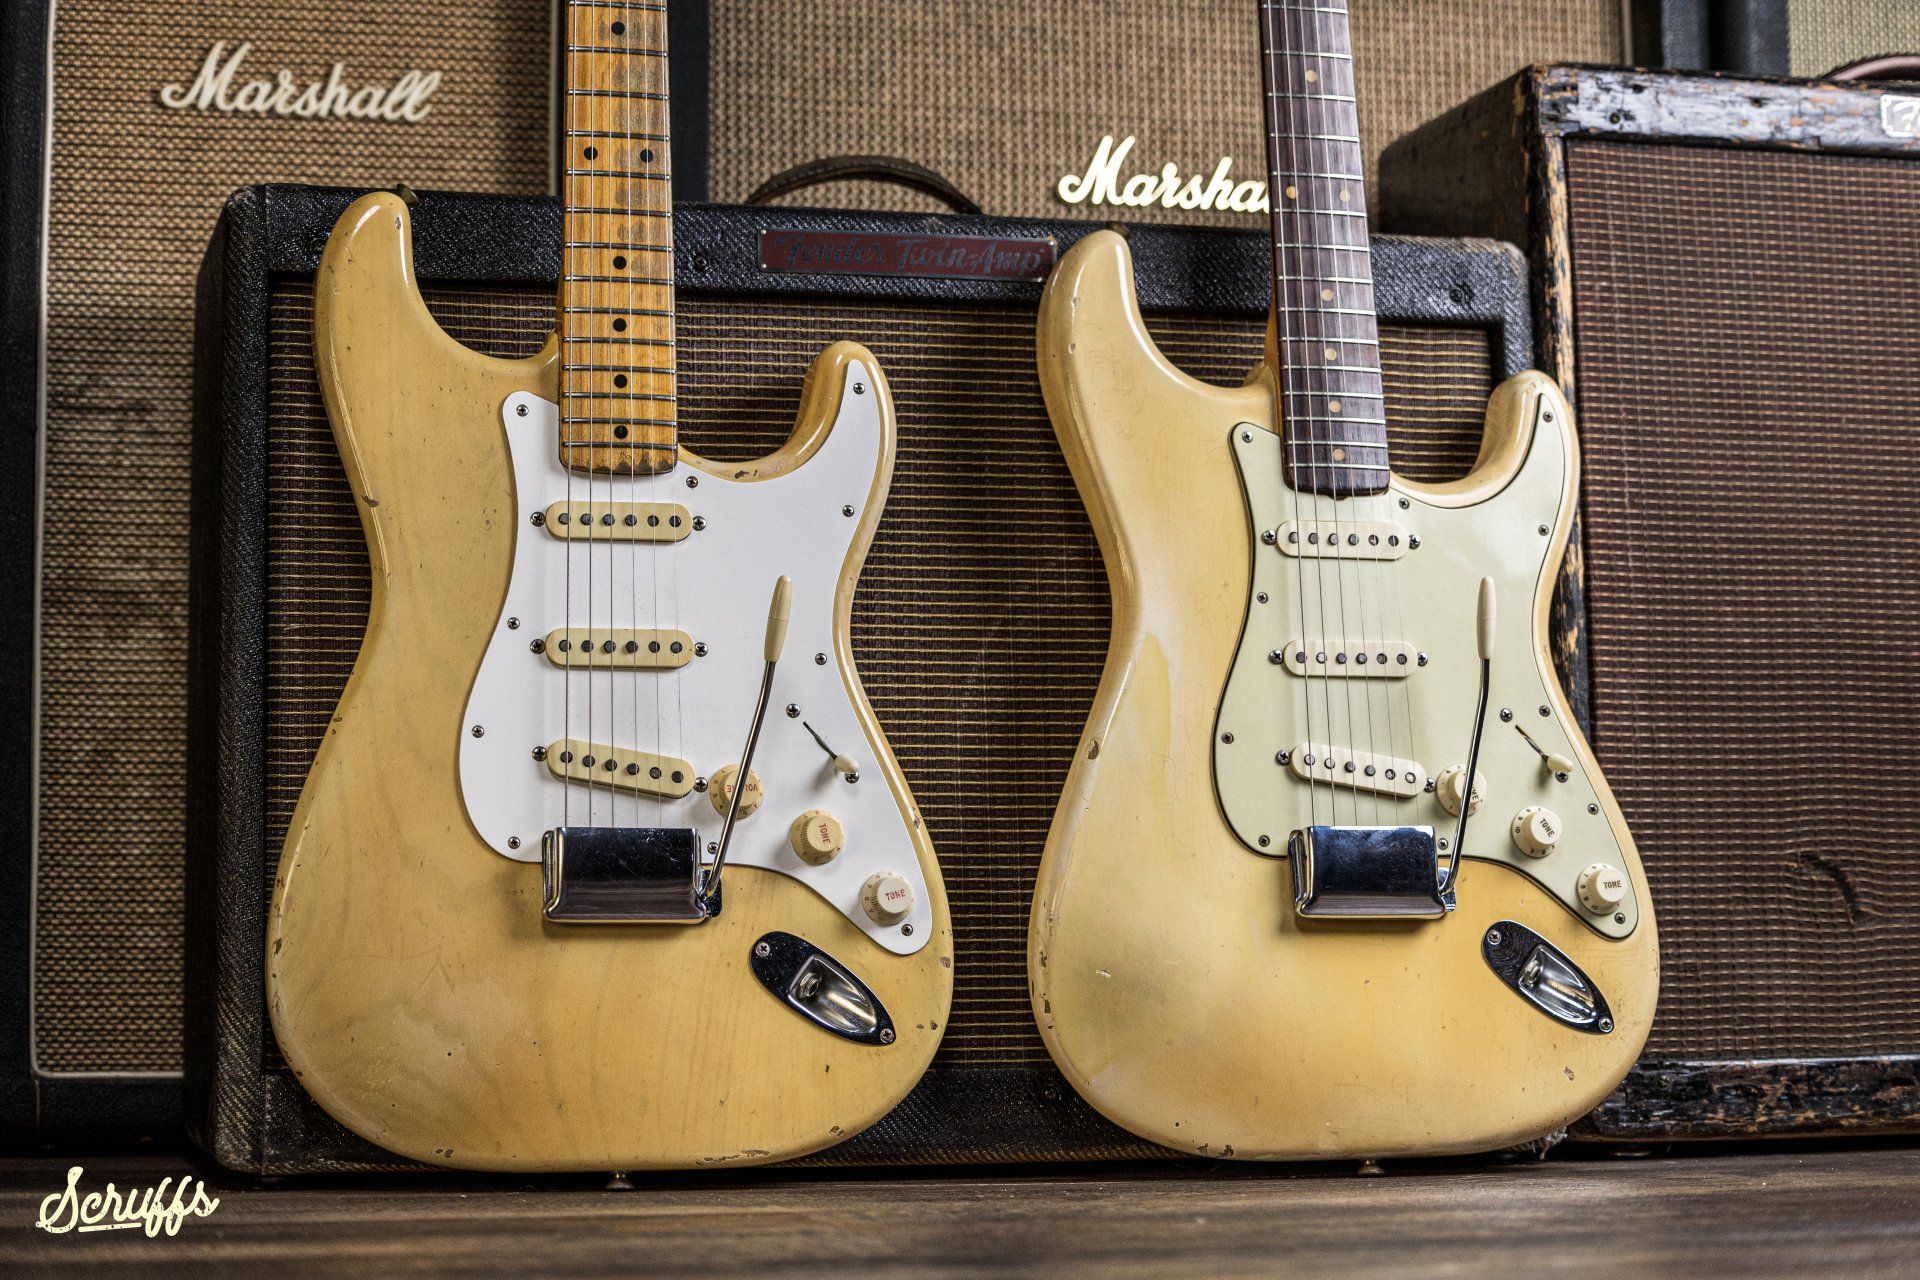 1959 & 1961 Blonde Stratocasters